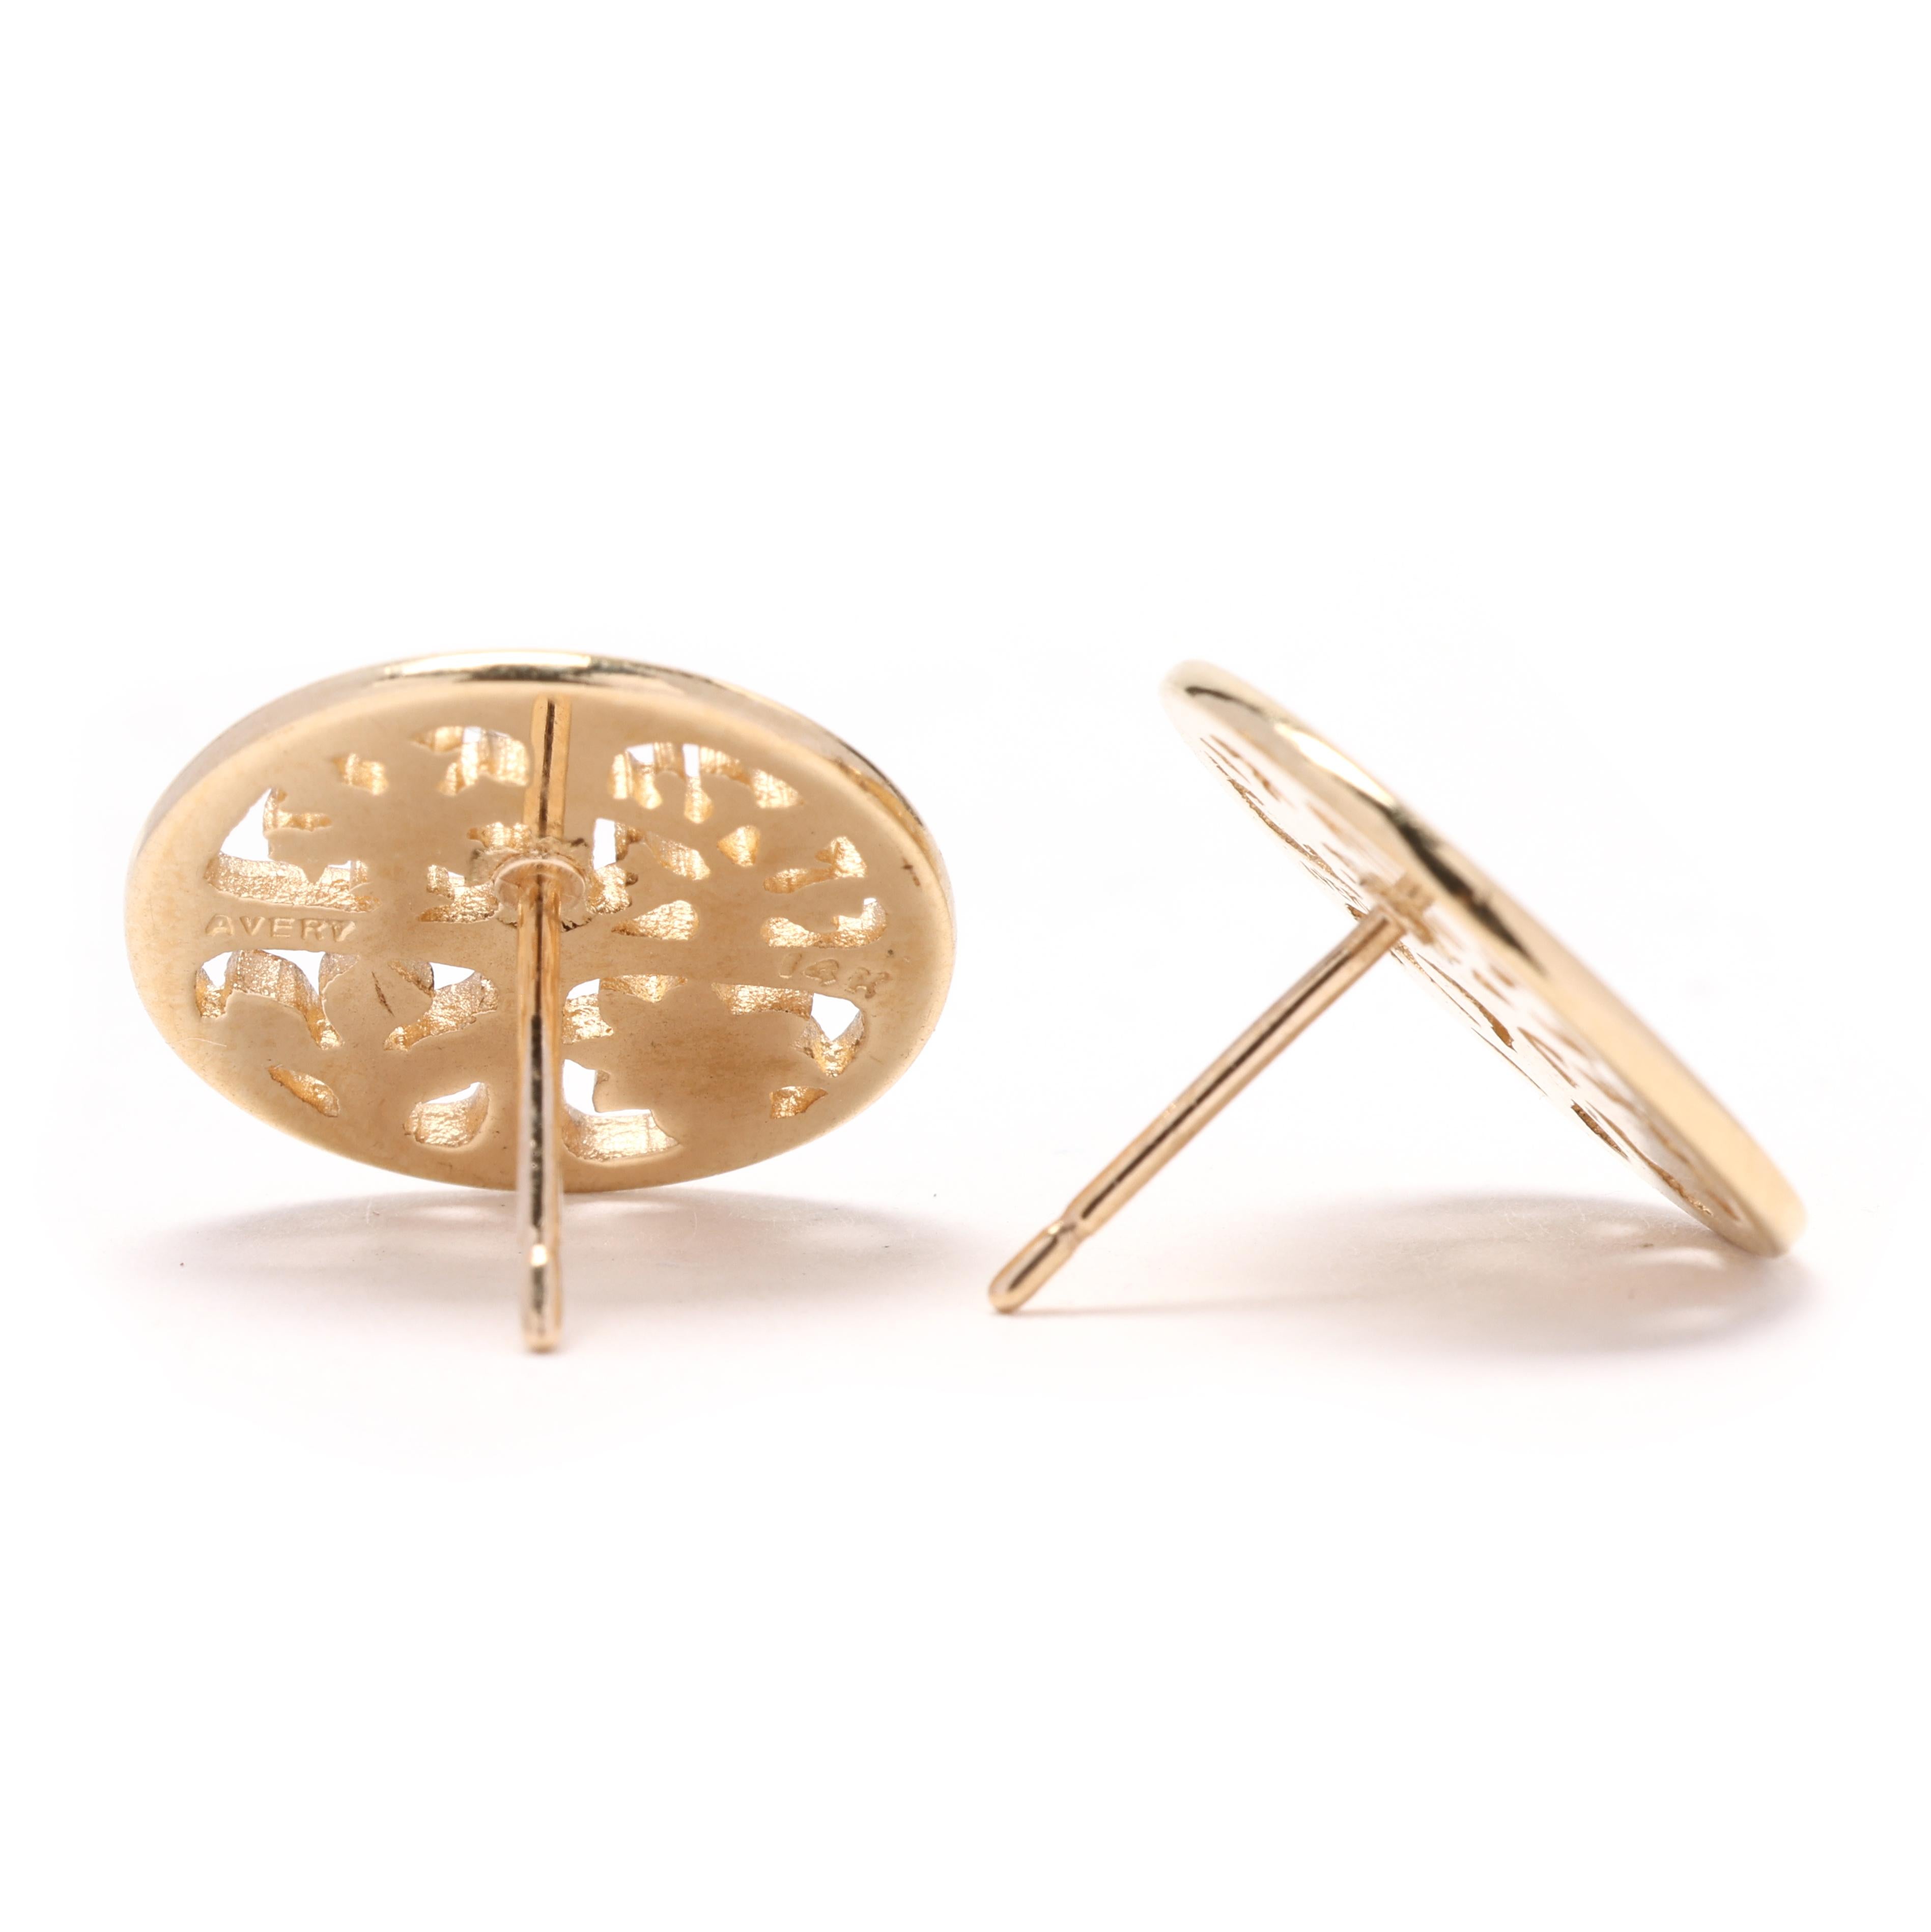 Add a touch of whimsy and elegance to your jewelry collection with these stunning James Avery Four Seasons Gold Studs. Crafted from 14k yellow gold, these large round studs are a classic and stylish choice for any occasion. The intricate design